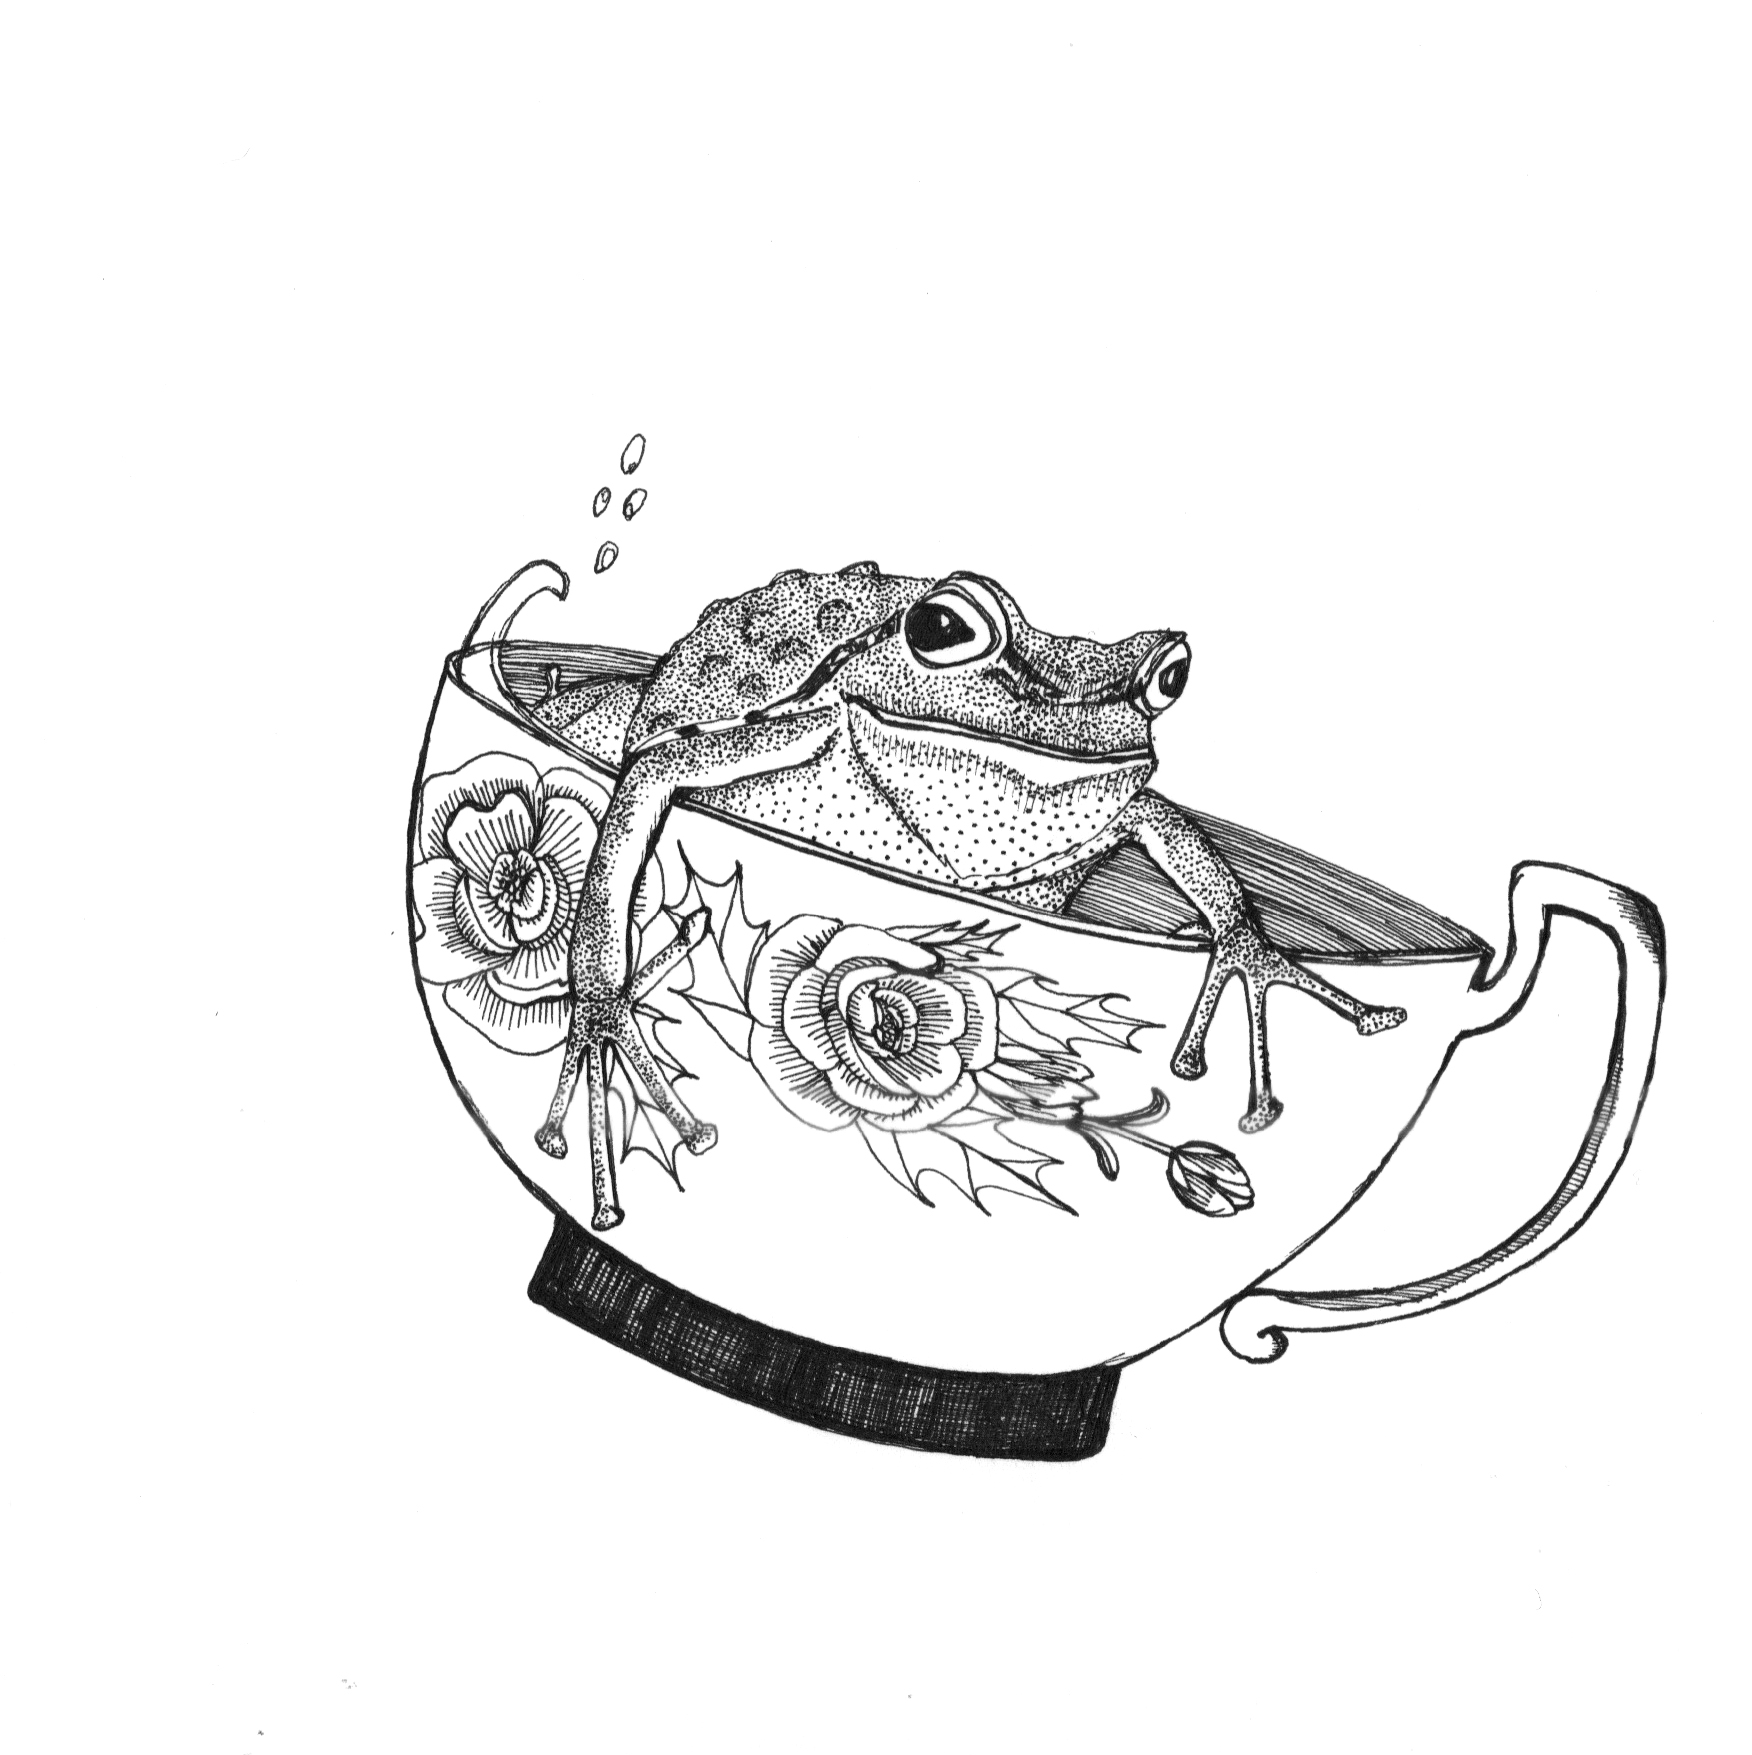 drawing of a frog in a teacup